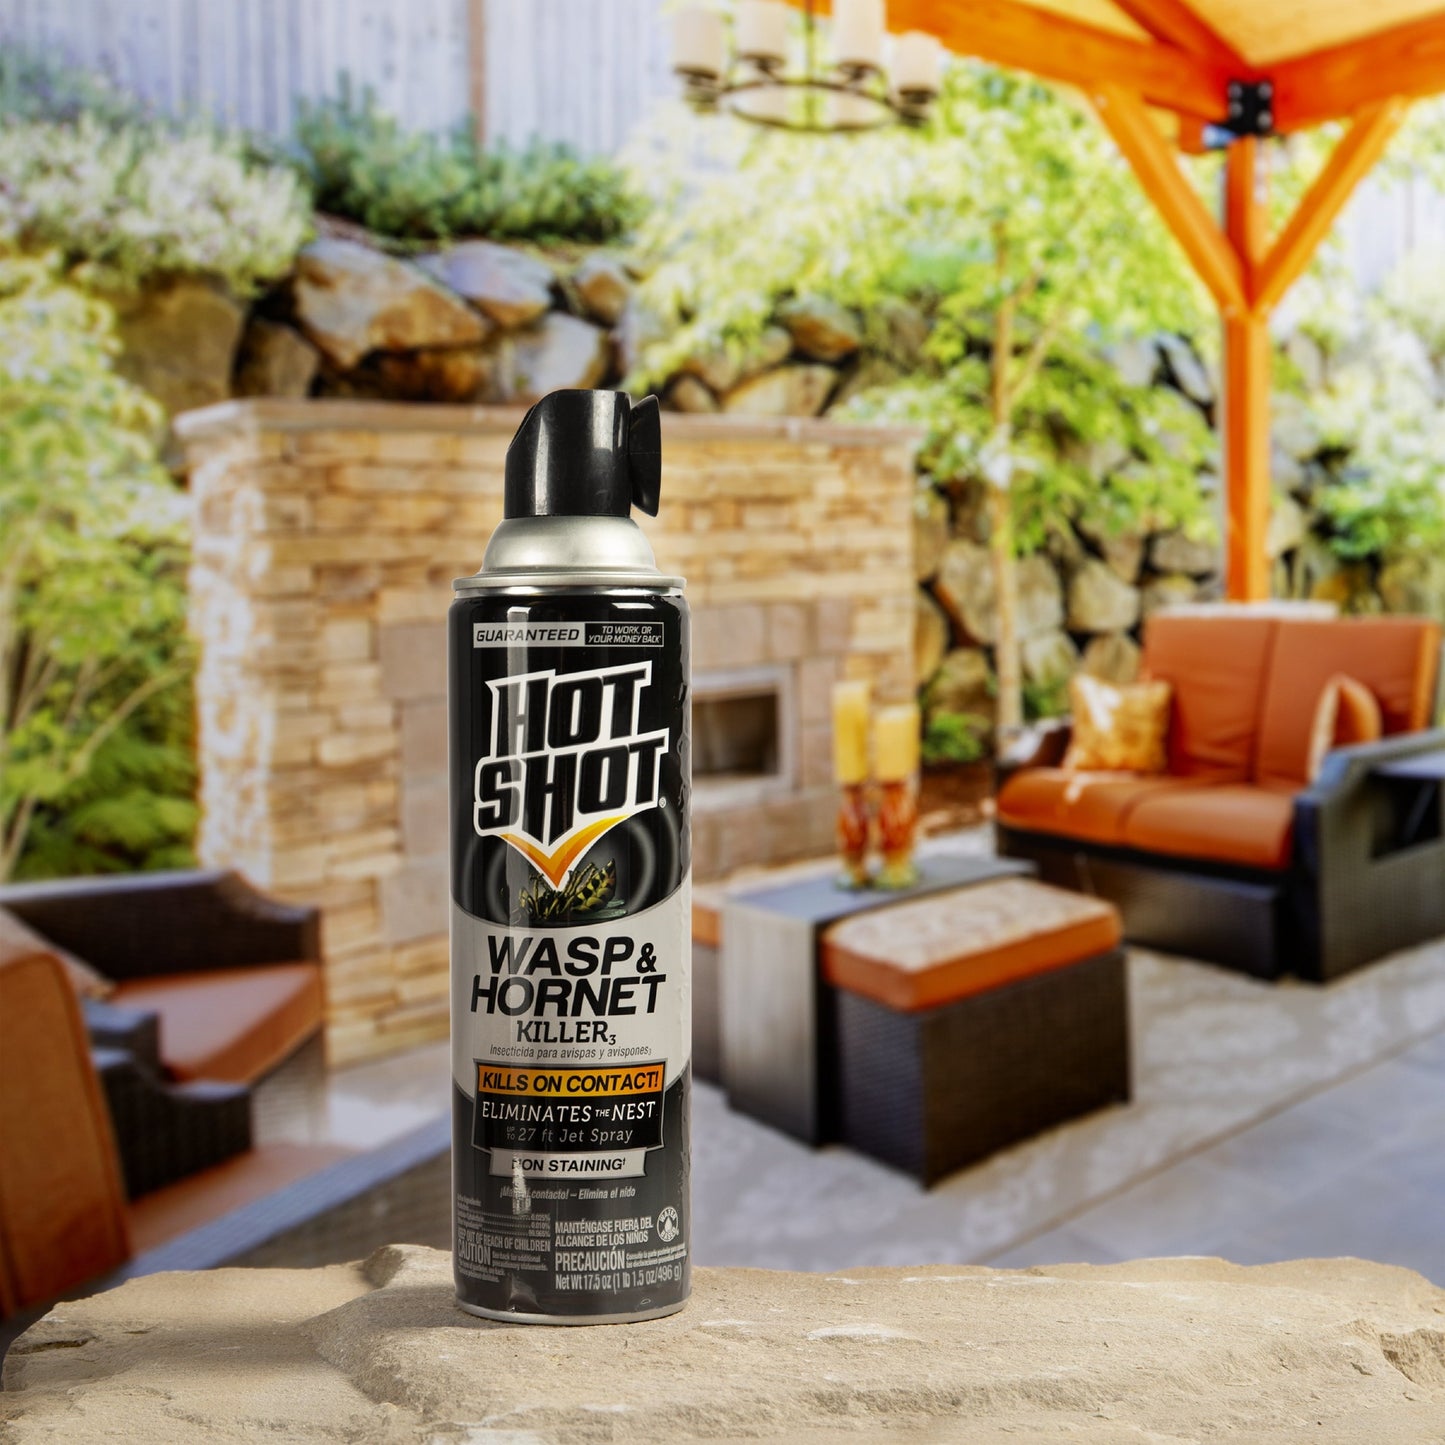 Hot Shot Wasp And Hornet Killer 17.5 Ounces, Up to 27 Foot Jet Spray